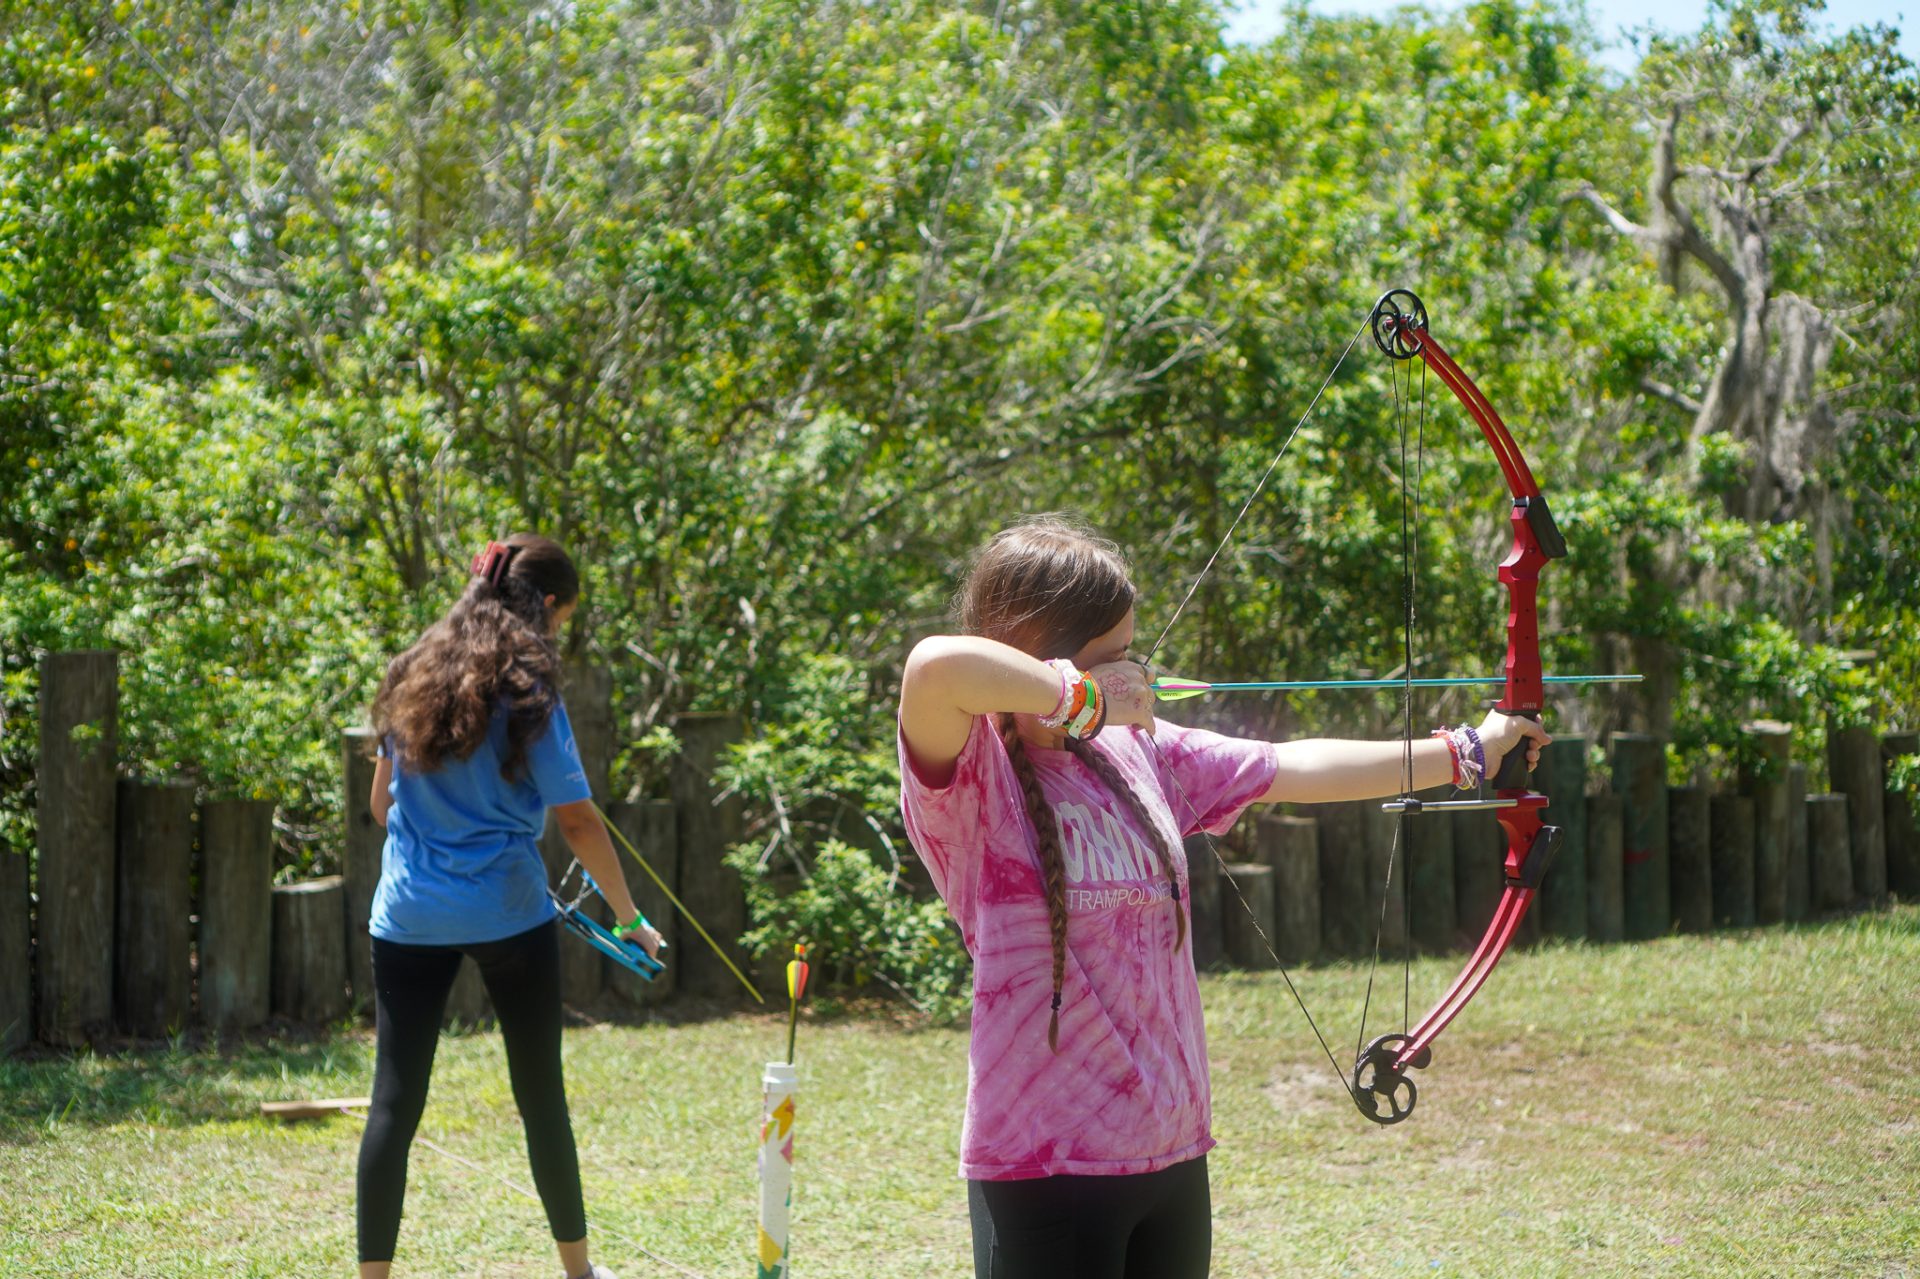  A preteen girl in a pink shirt holding a bow and arrow at Camp Wai Lani. 